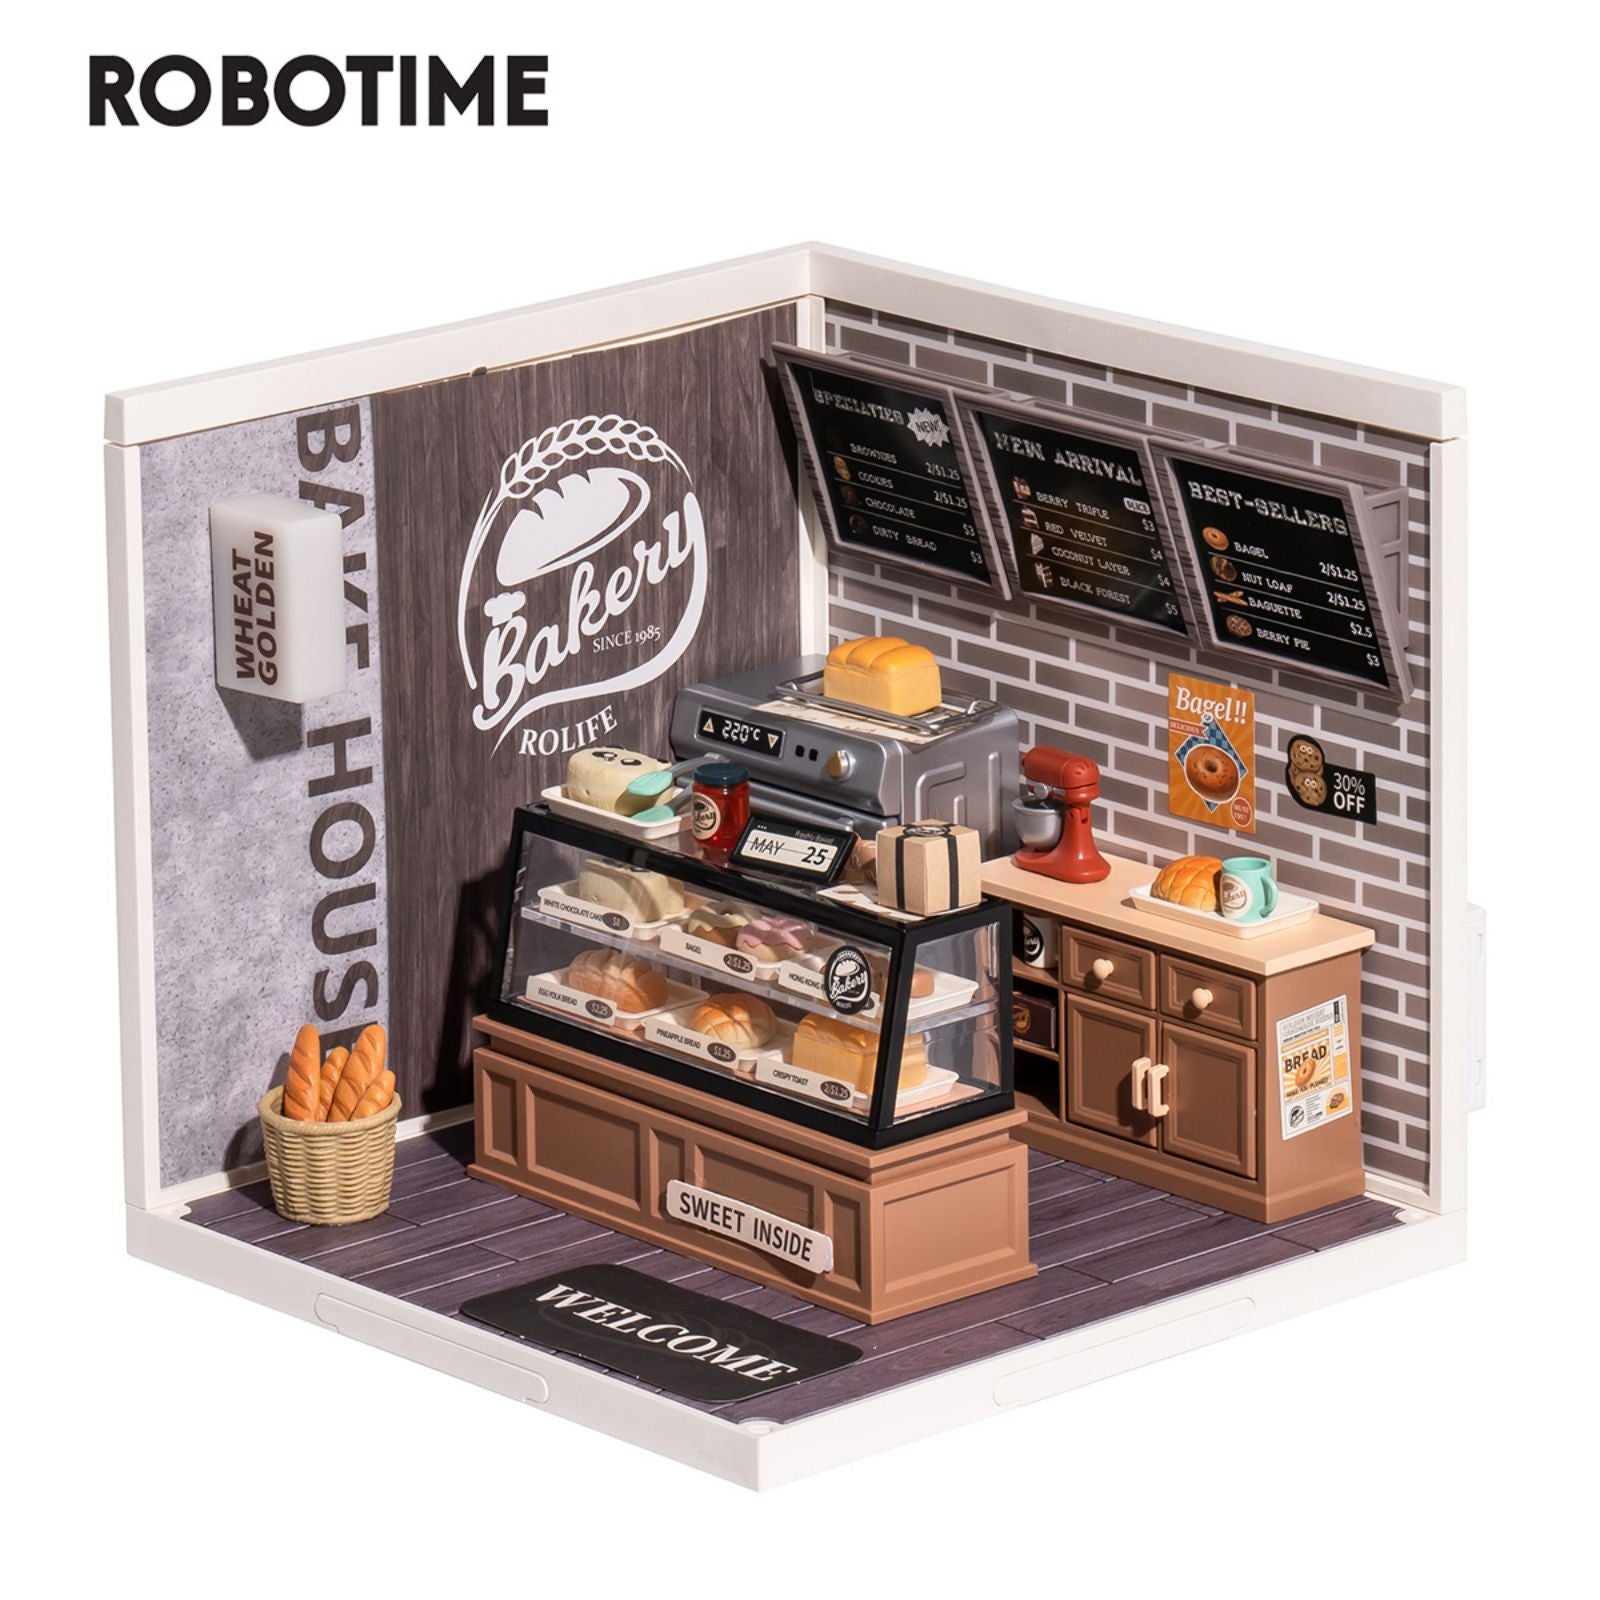 Robotime Rolife 3D Puzzle Kit Build Your Own Golden Wheat Bakery a Charming and Intricate DIY Miniature House Set for Kids Adult